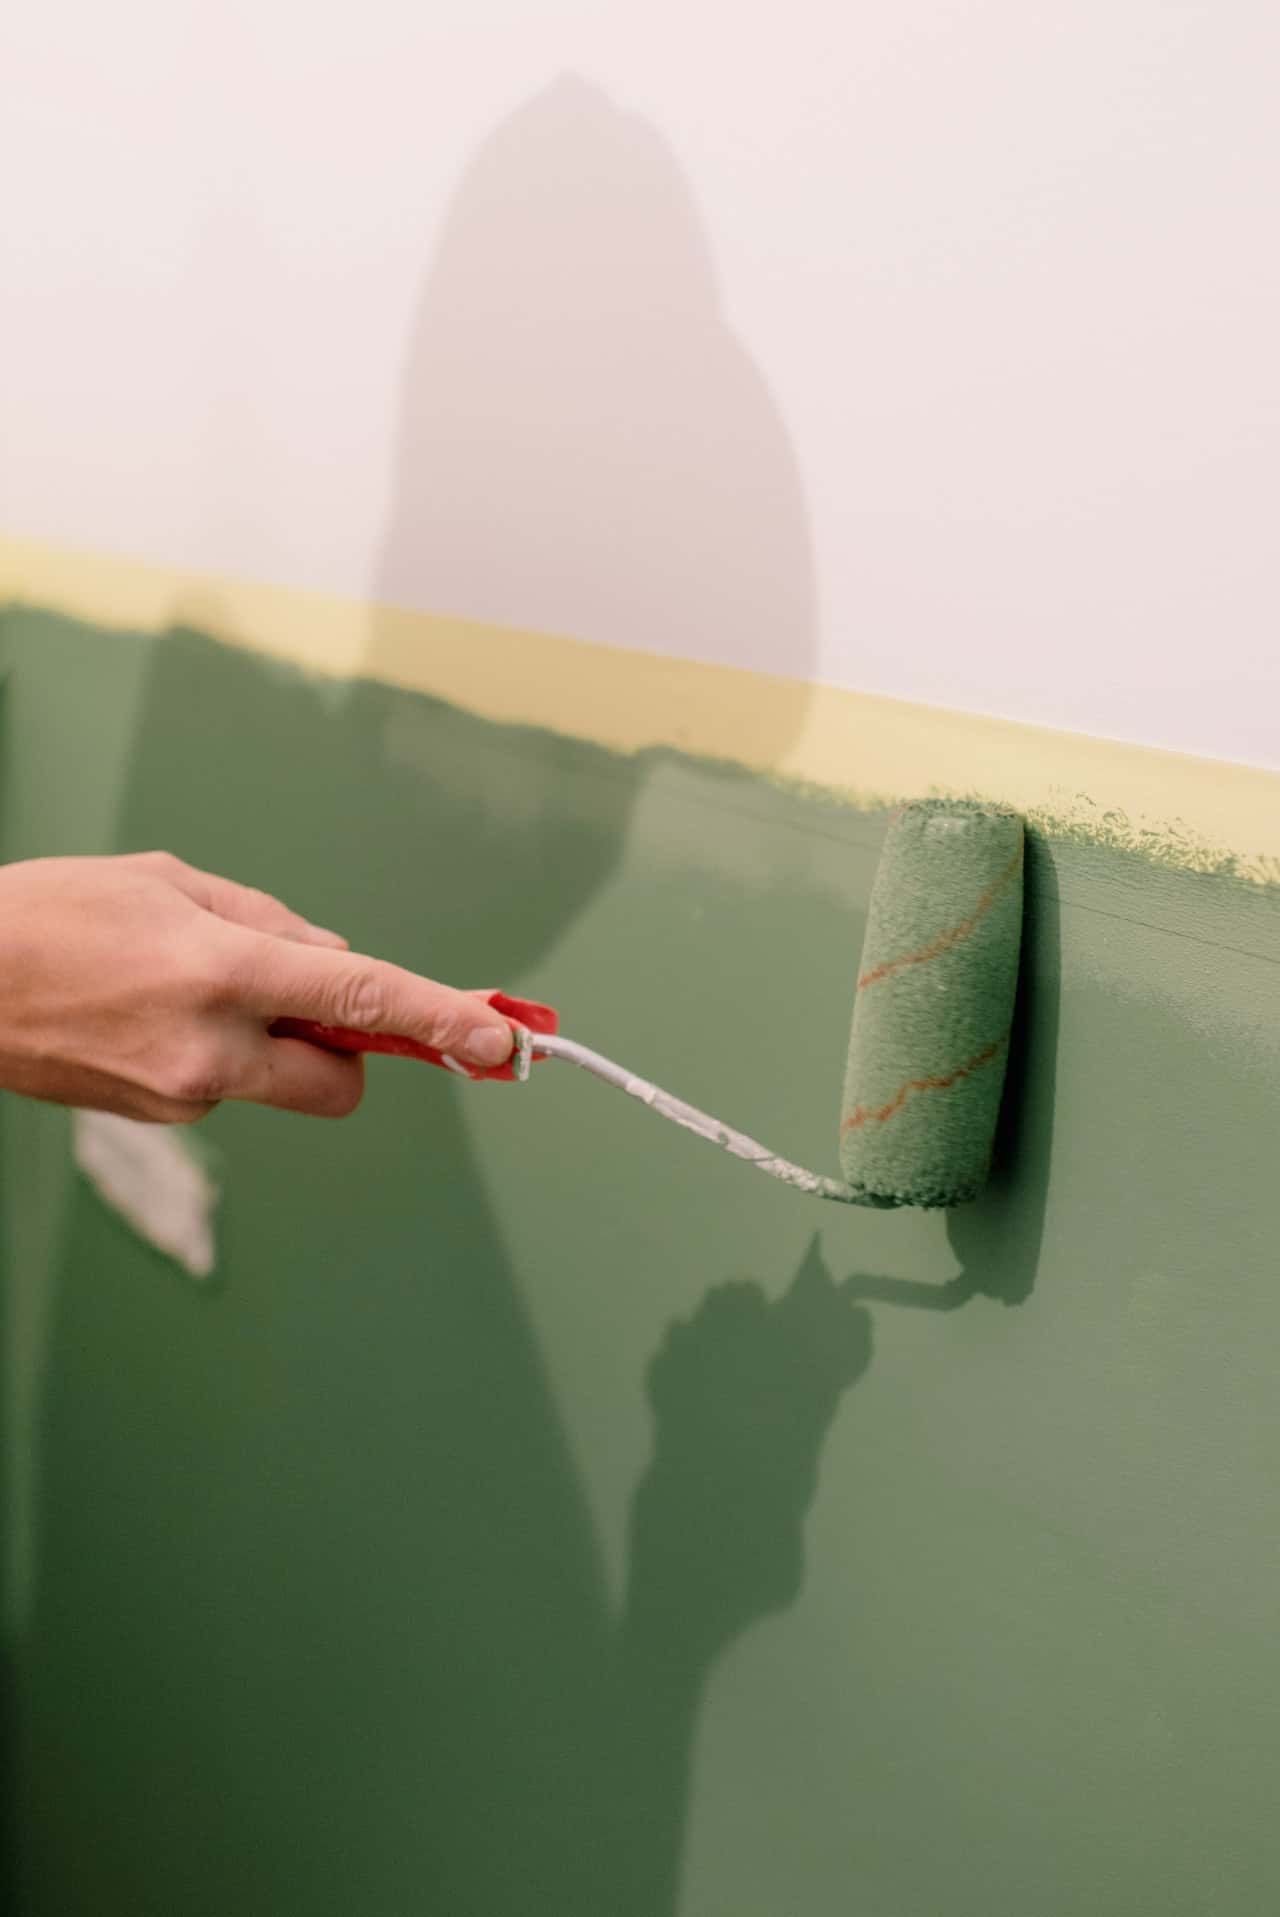 30 Wall Paint Design Ideas with Tape: Types, Techniques & Tips